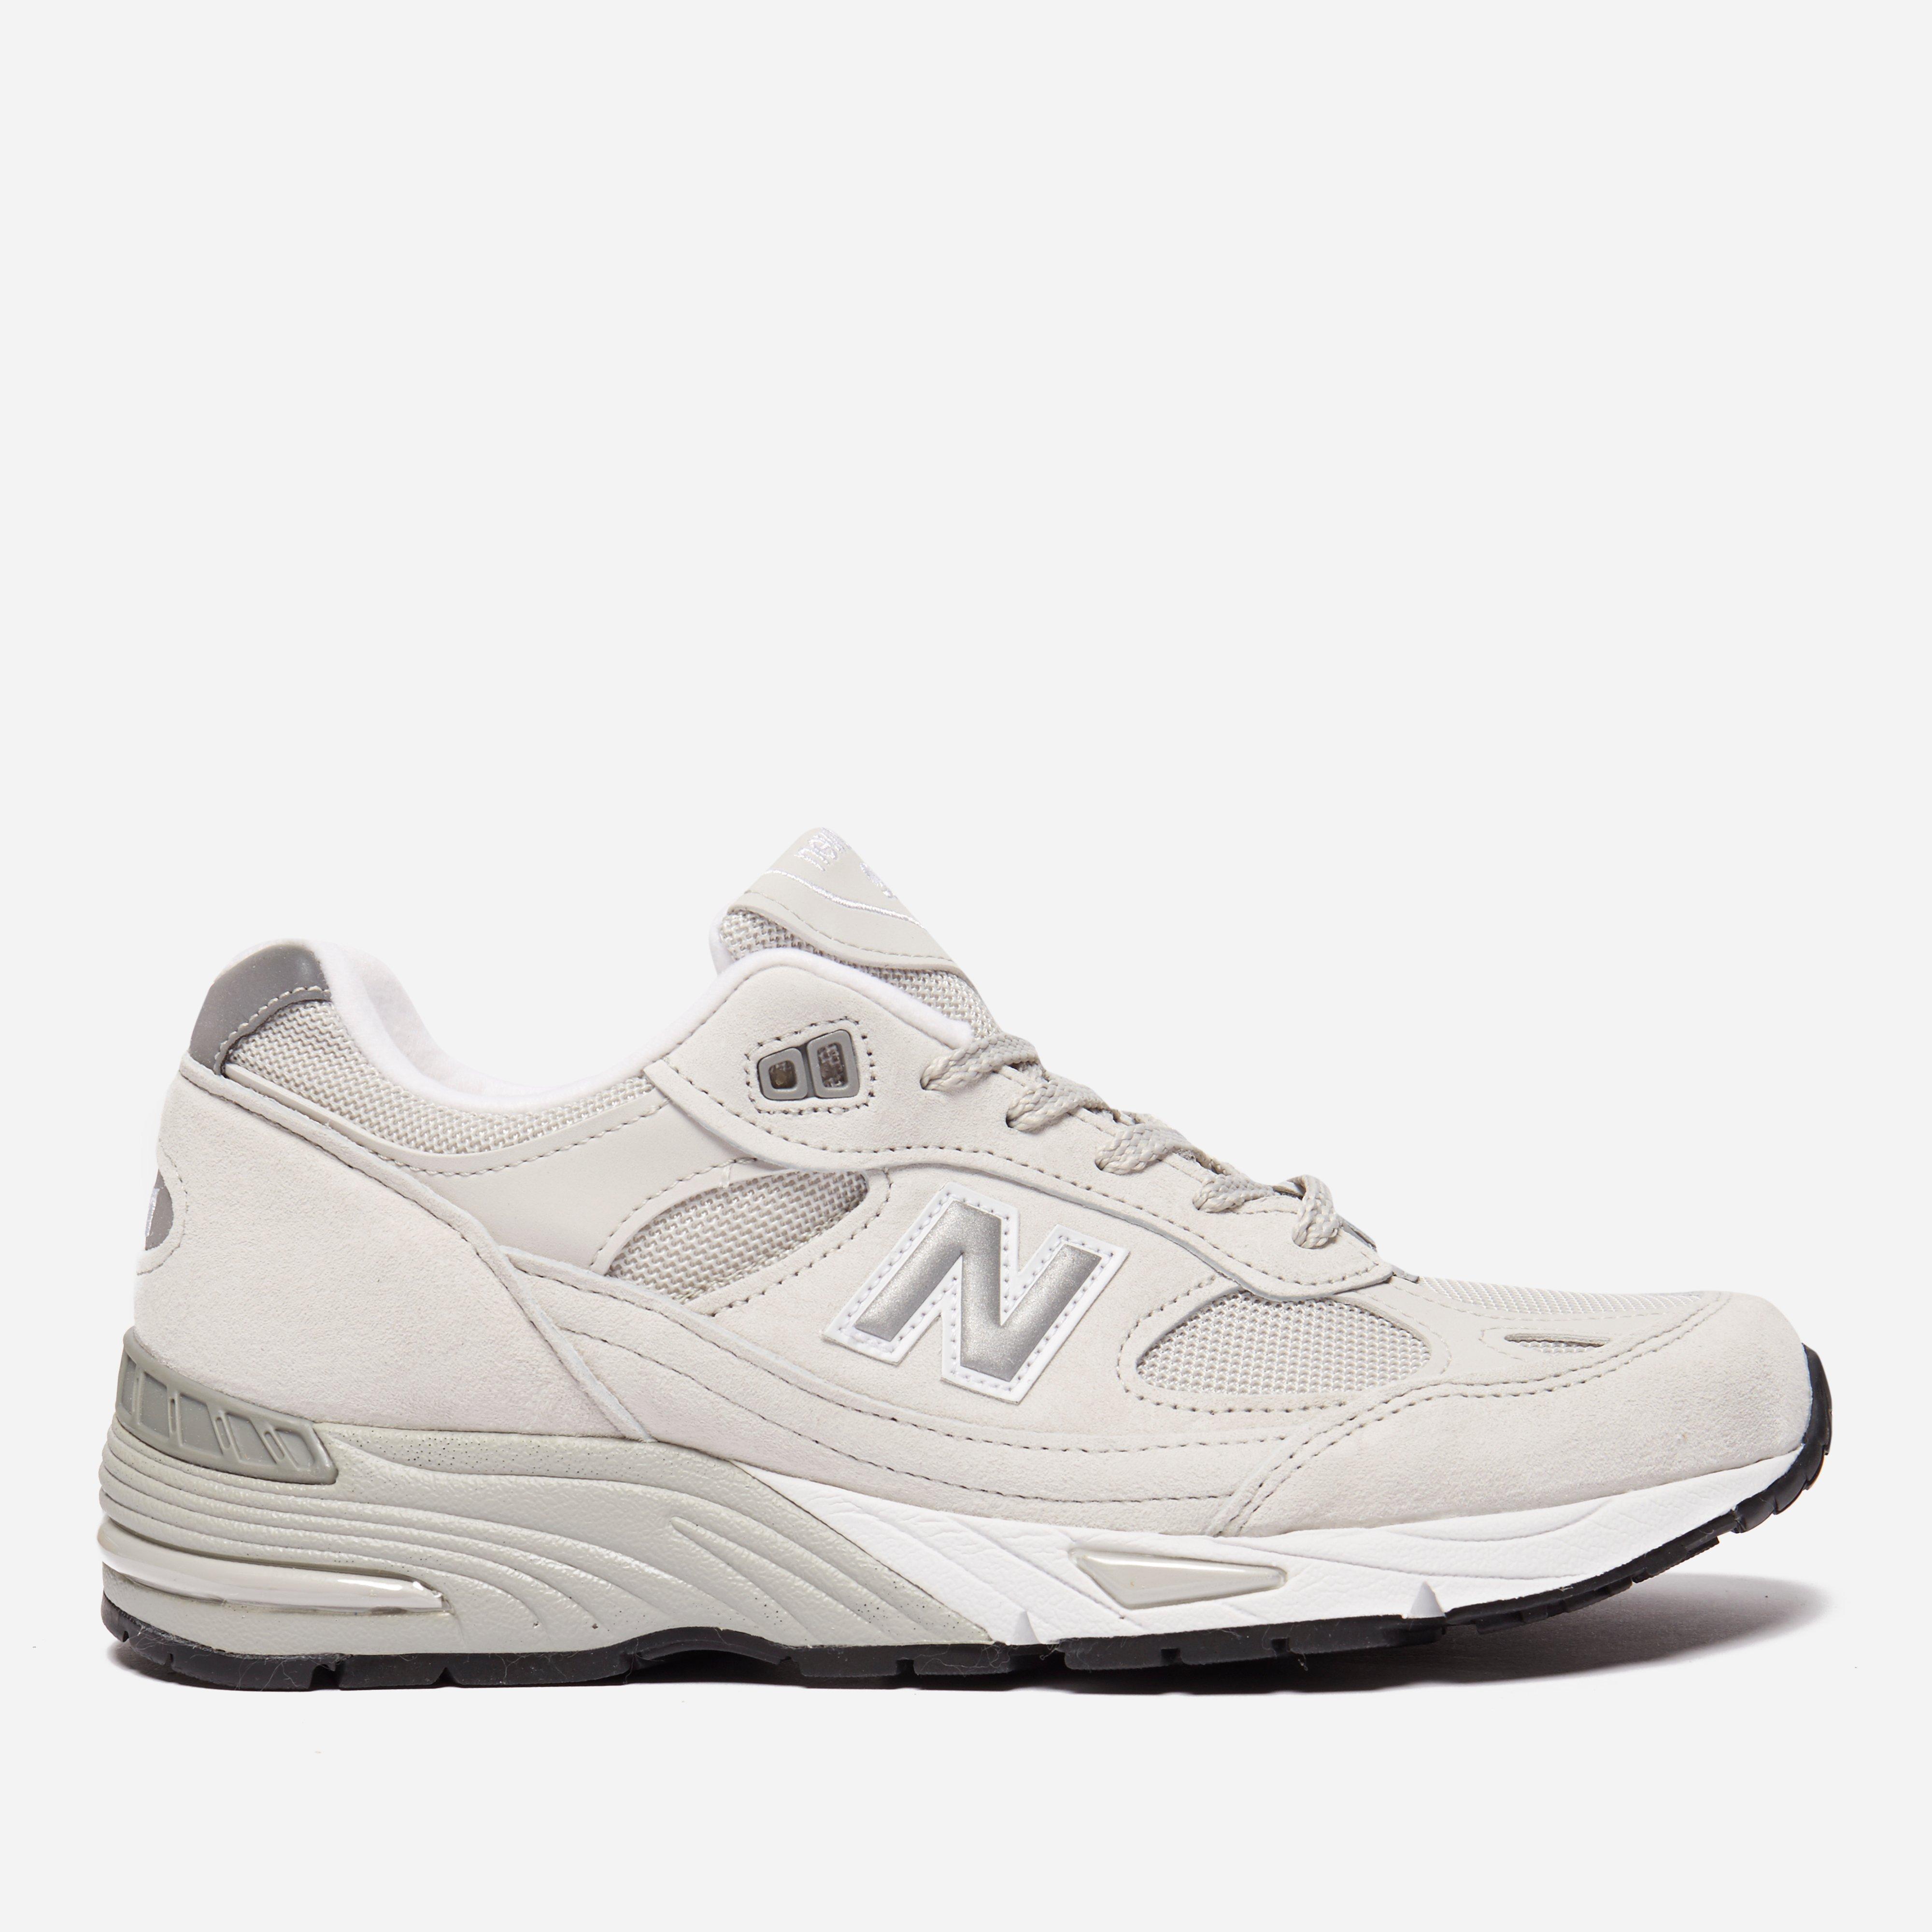 New Balance M 991 Pow Made In England in White for Men - Lyst